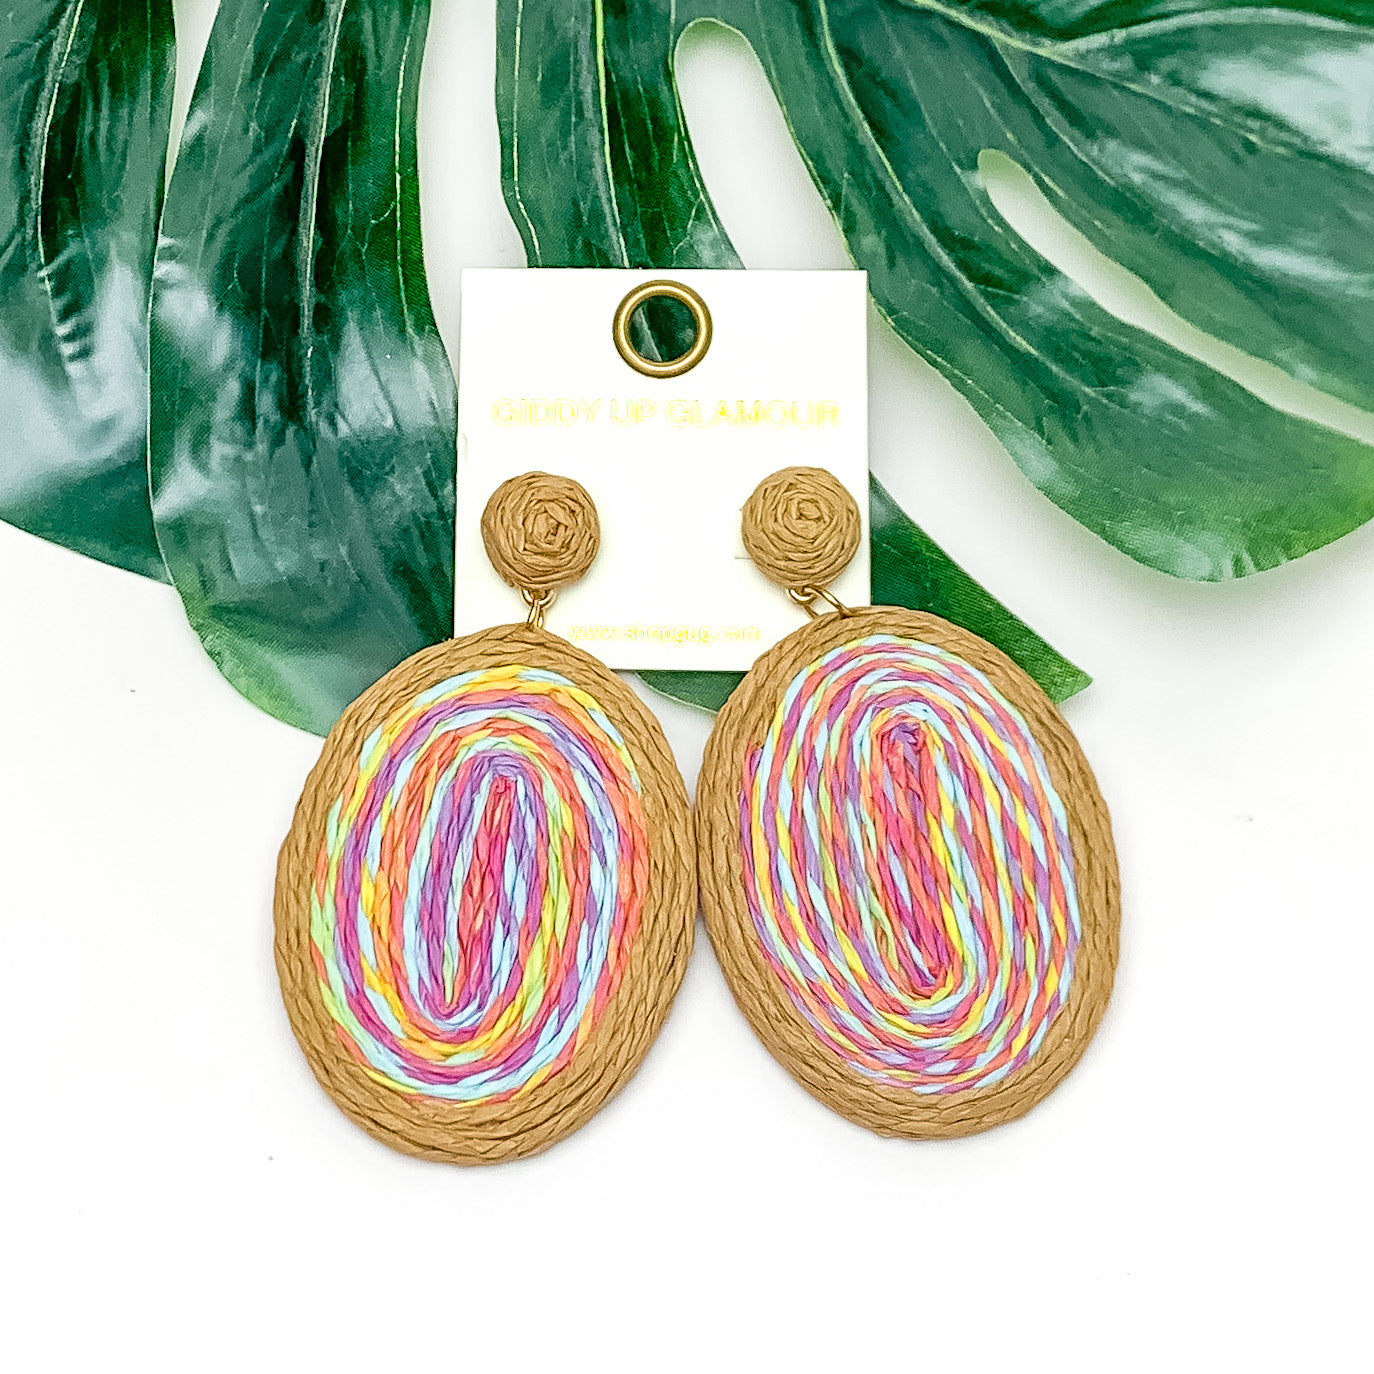 Brunch Bash Raffia Wrapped Oval Earrings in Multicolor. Pictured on a white background with a large leaf behind the earrings.